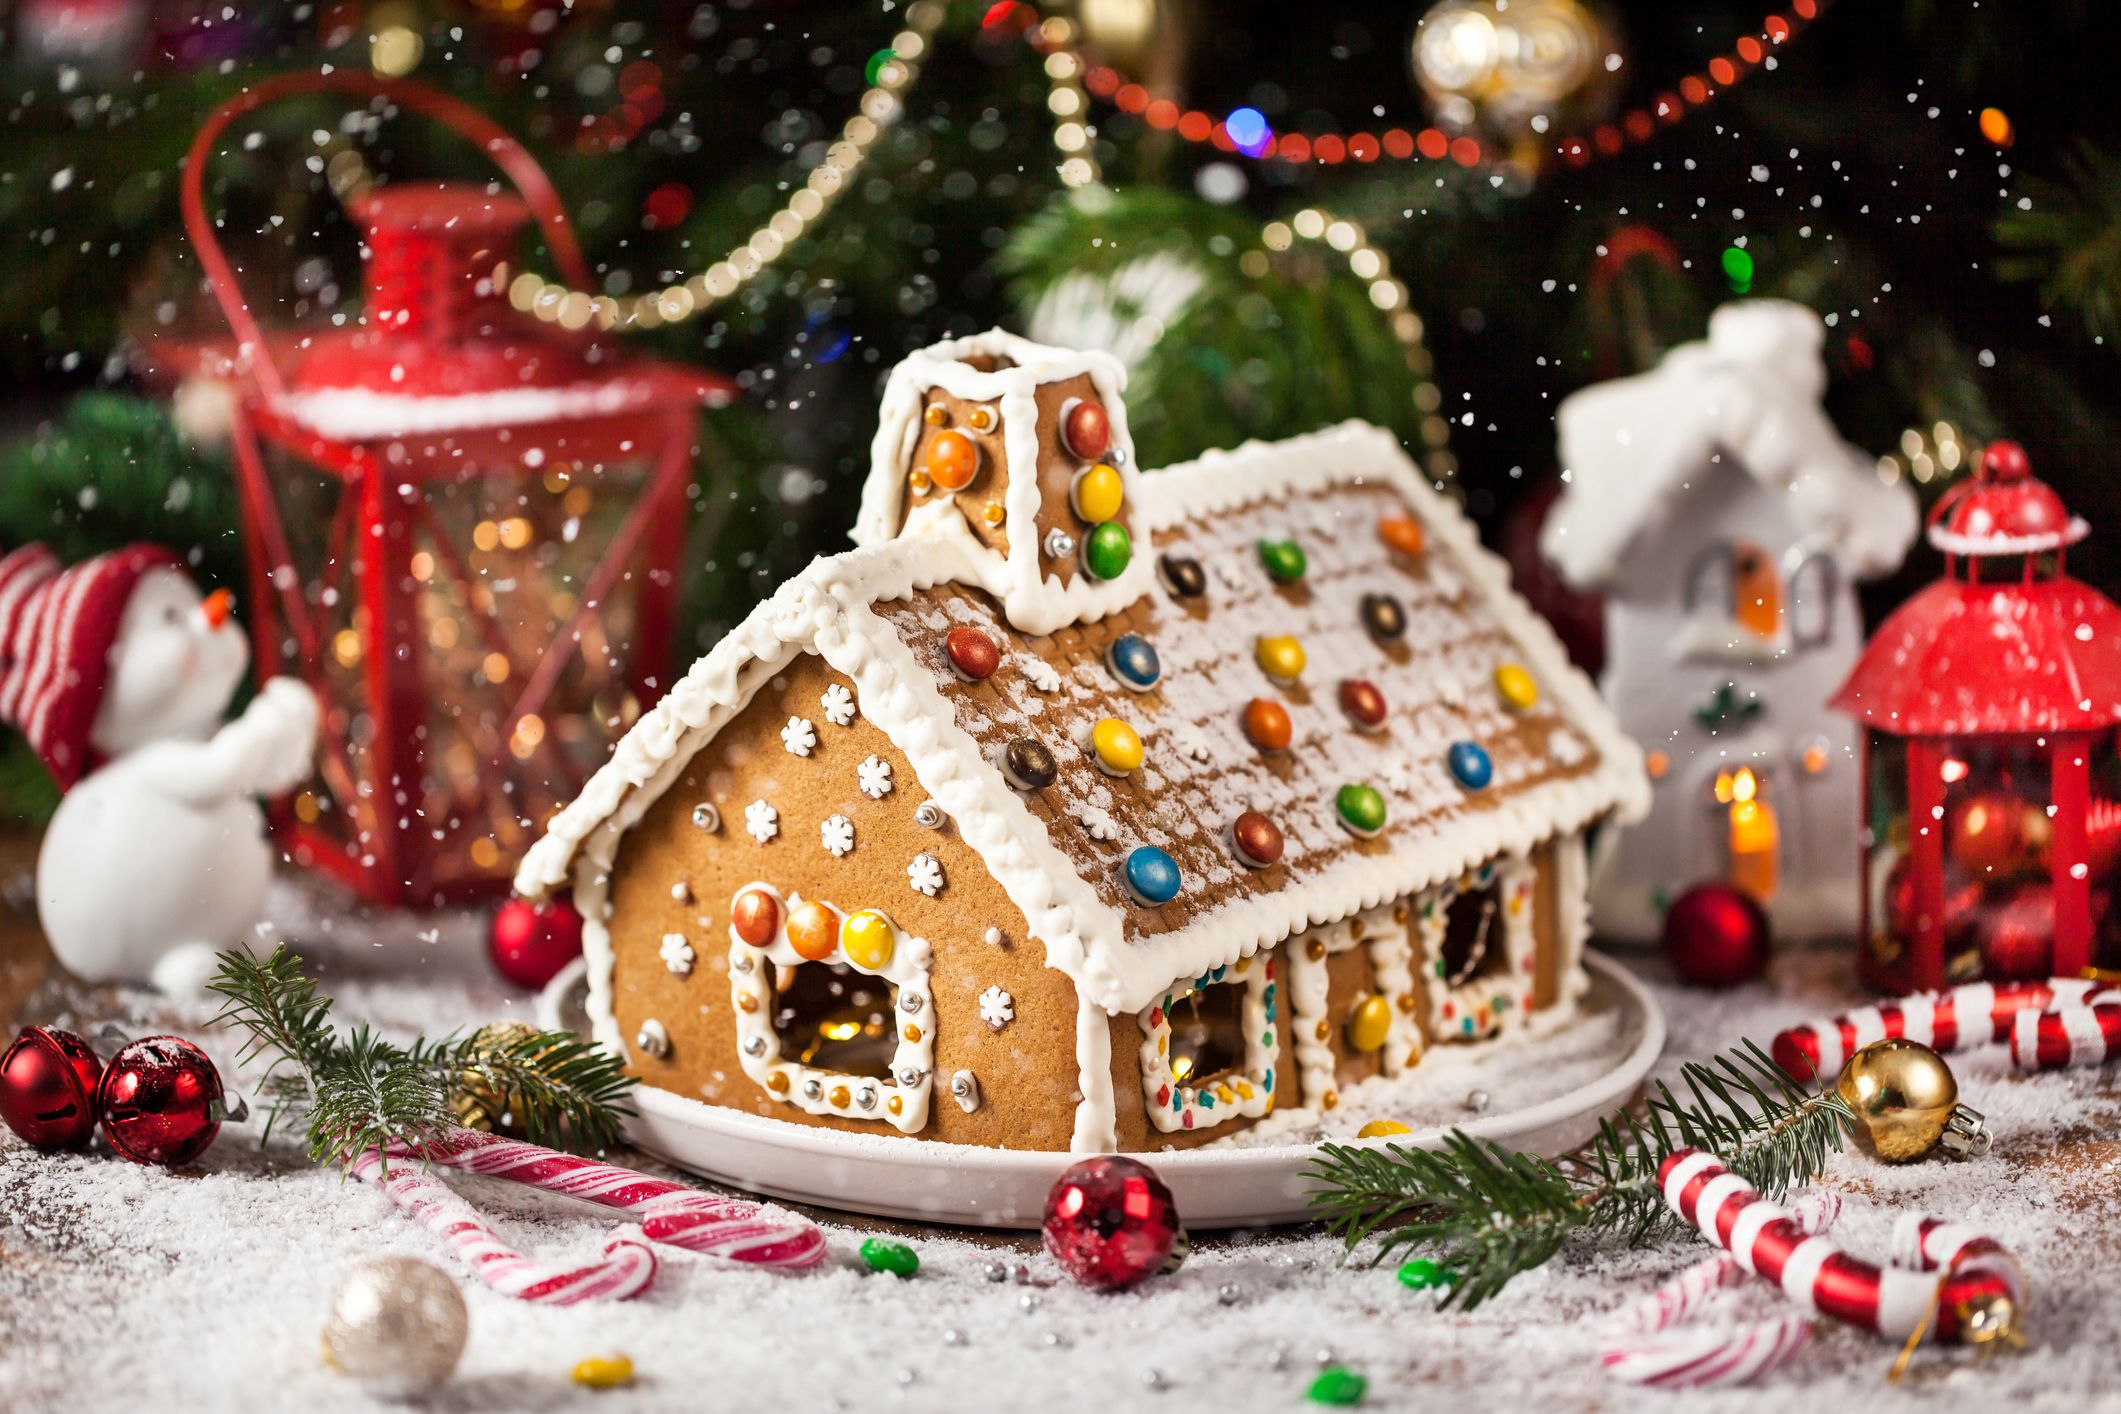 https://hips.hearstapps.com/hmg-prod/images/homemade-christmas-gingerbread-house-with-holiday-royalty-free-image-1699455080.jpg